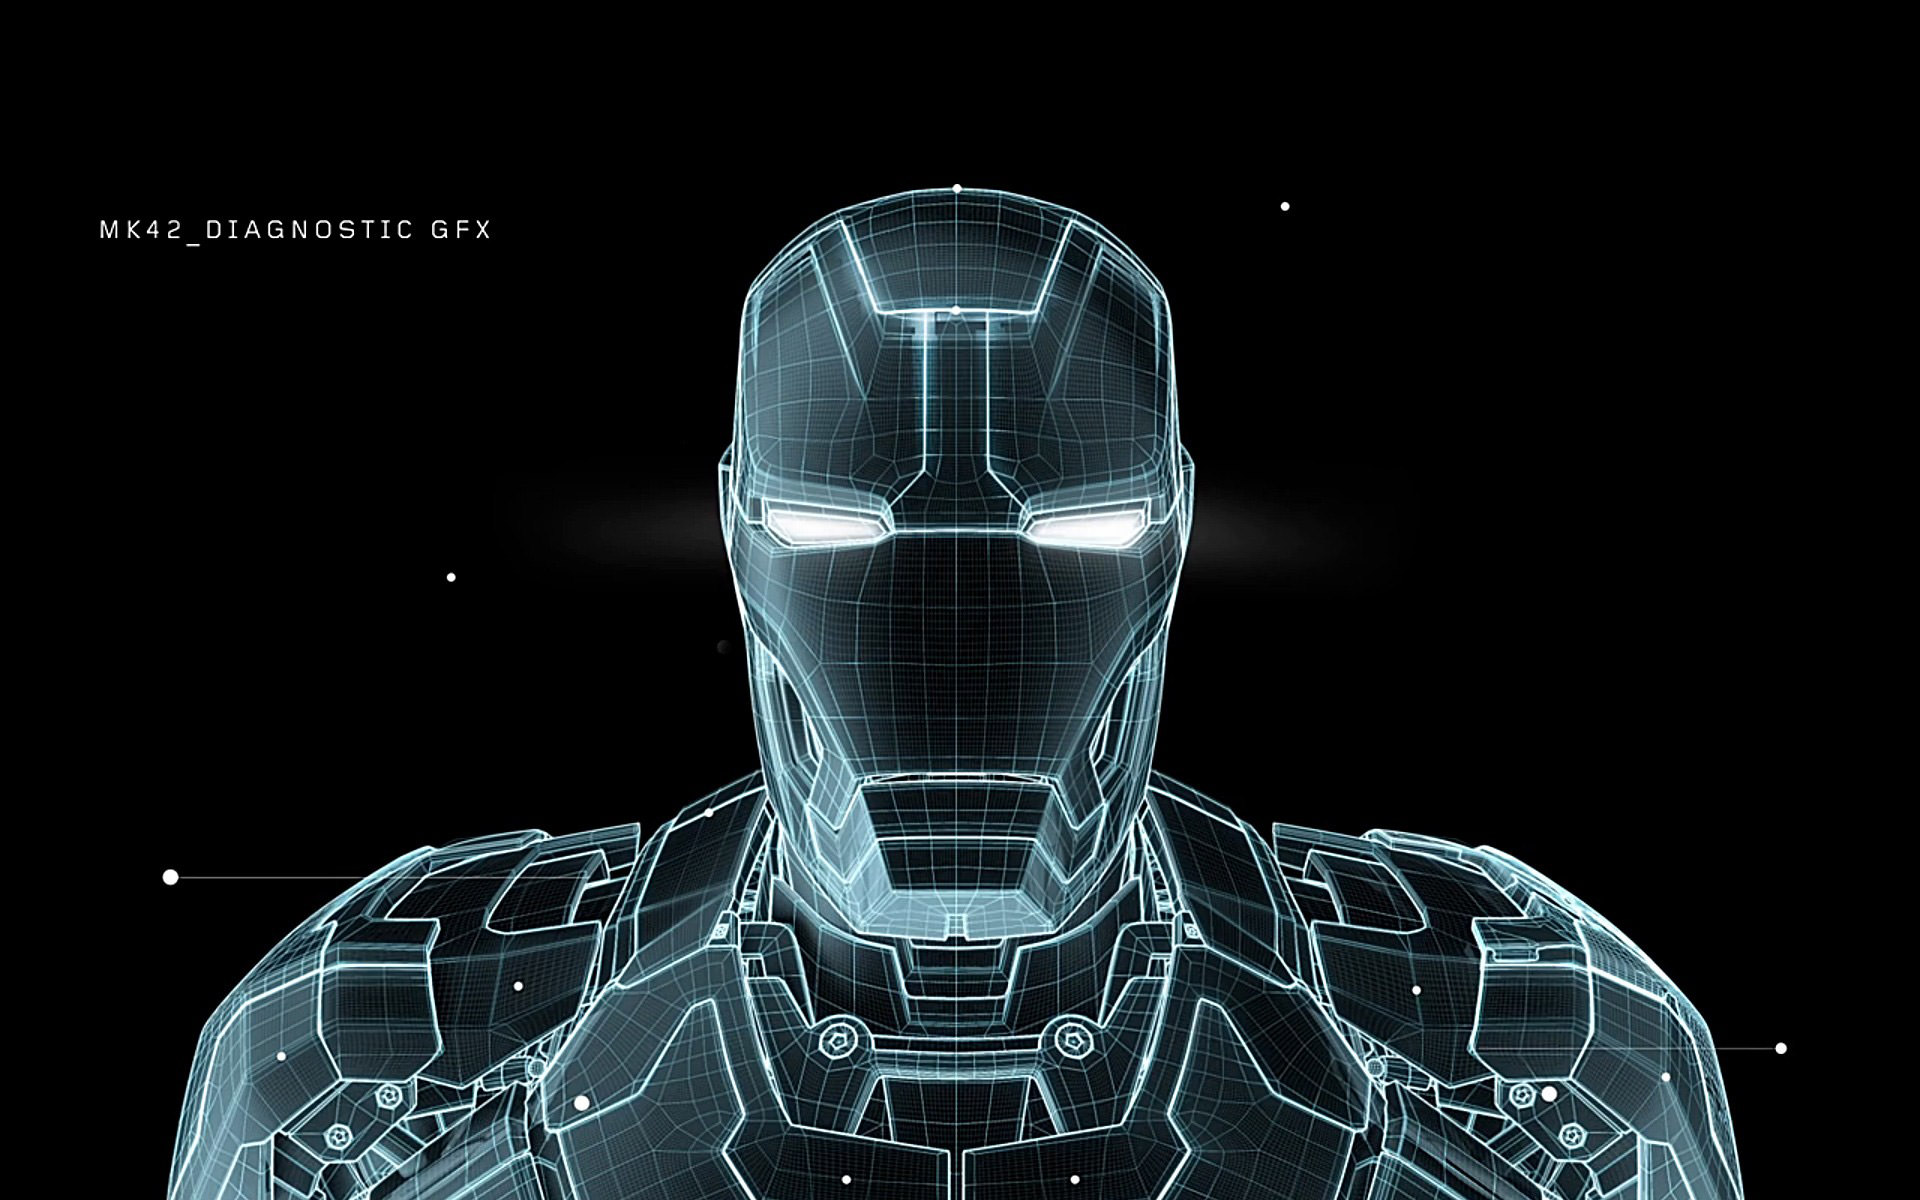 Silver Iron Man Suit 4K Wallpapers